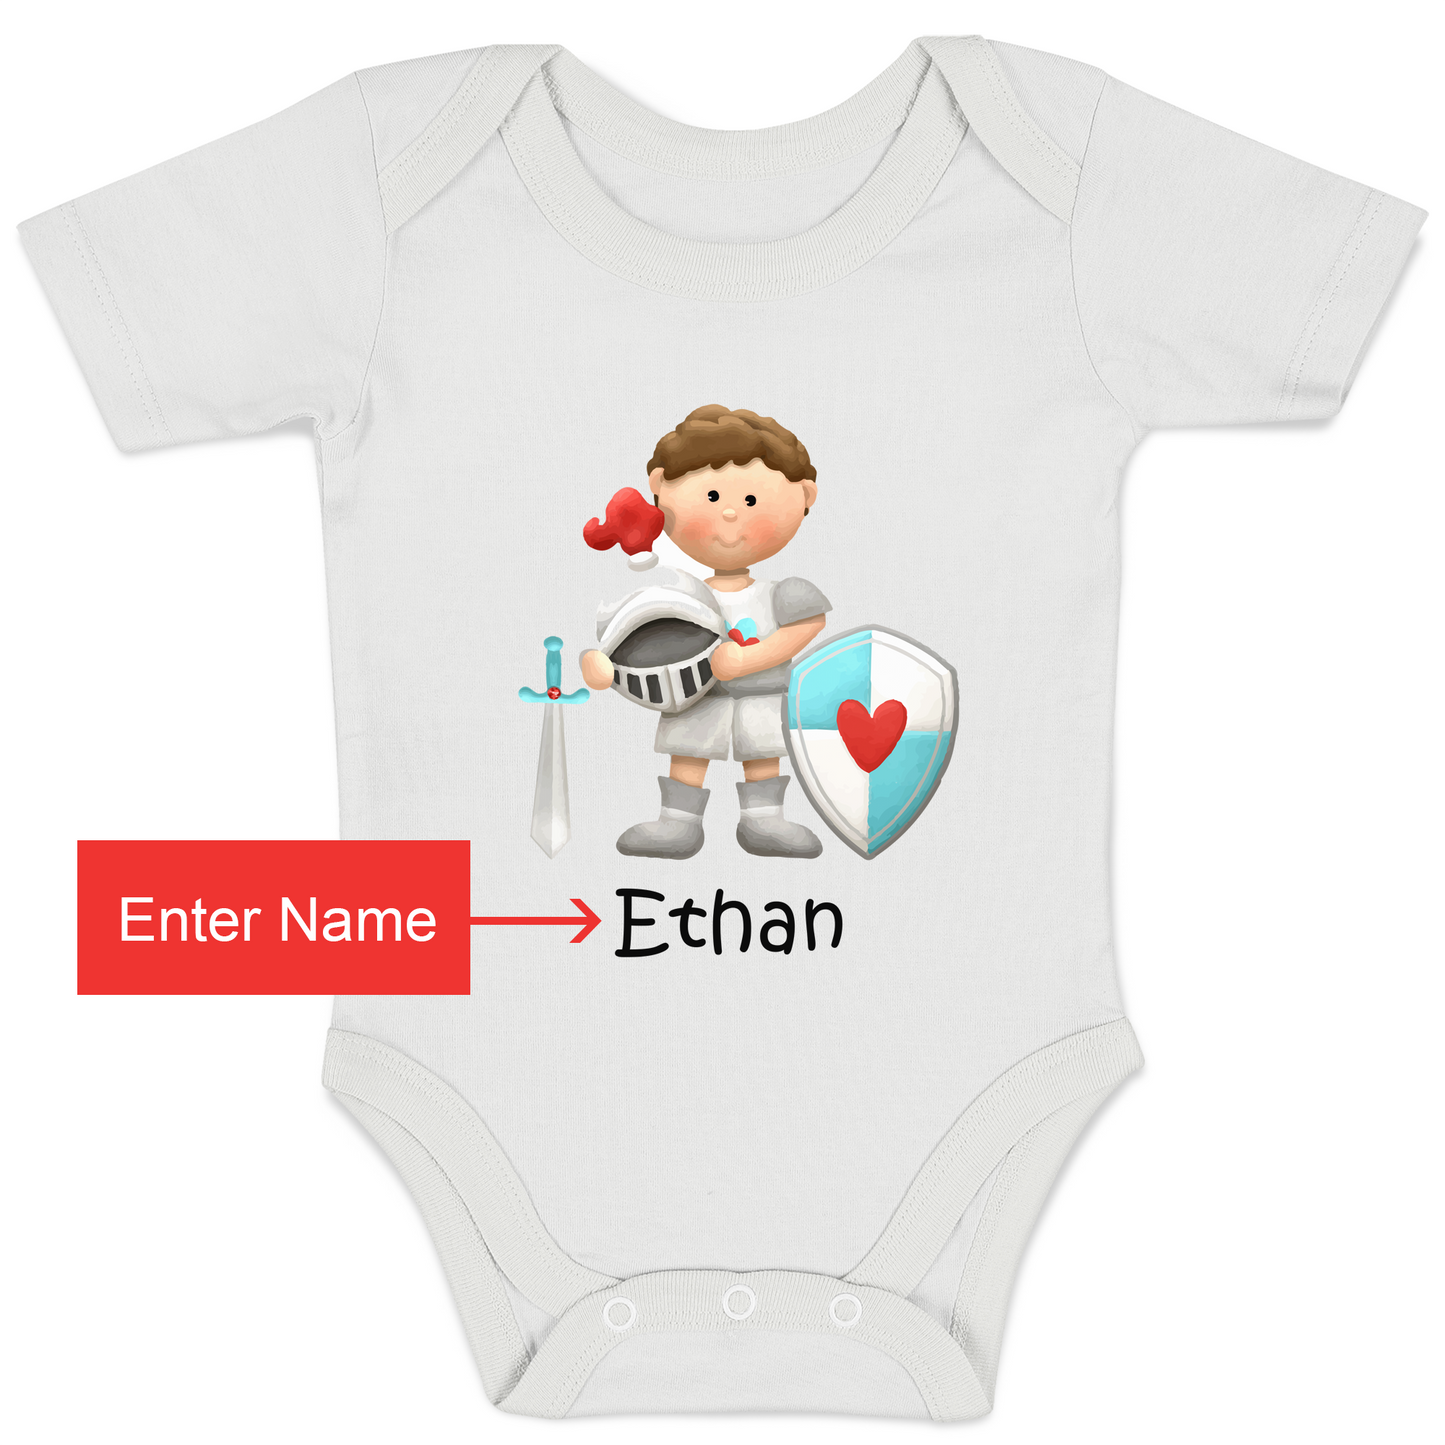 [Personalized] Endanzoo Organic Short Sleeves Baby Bodysuit- Knights